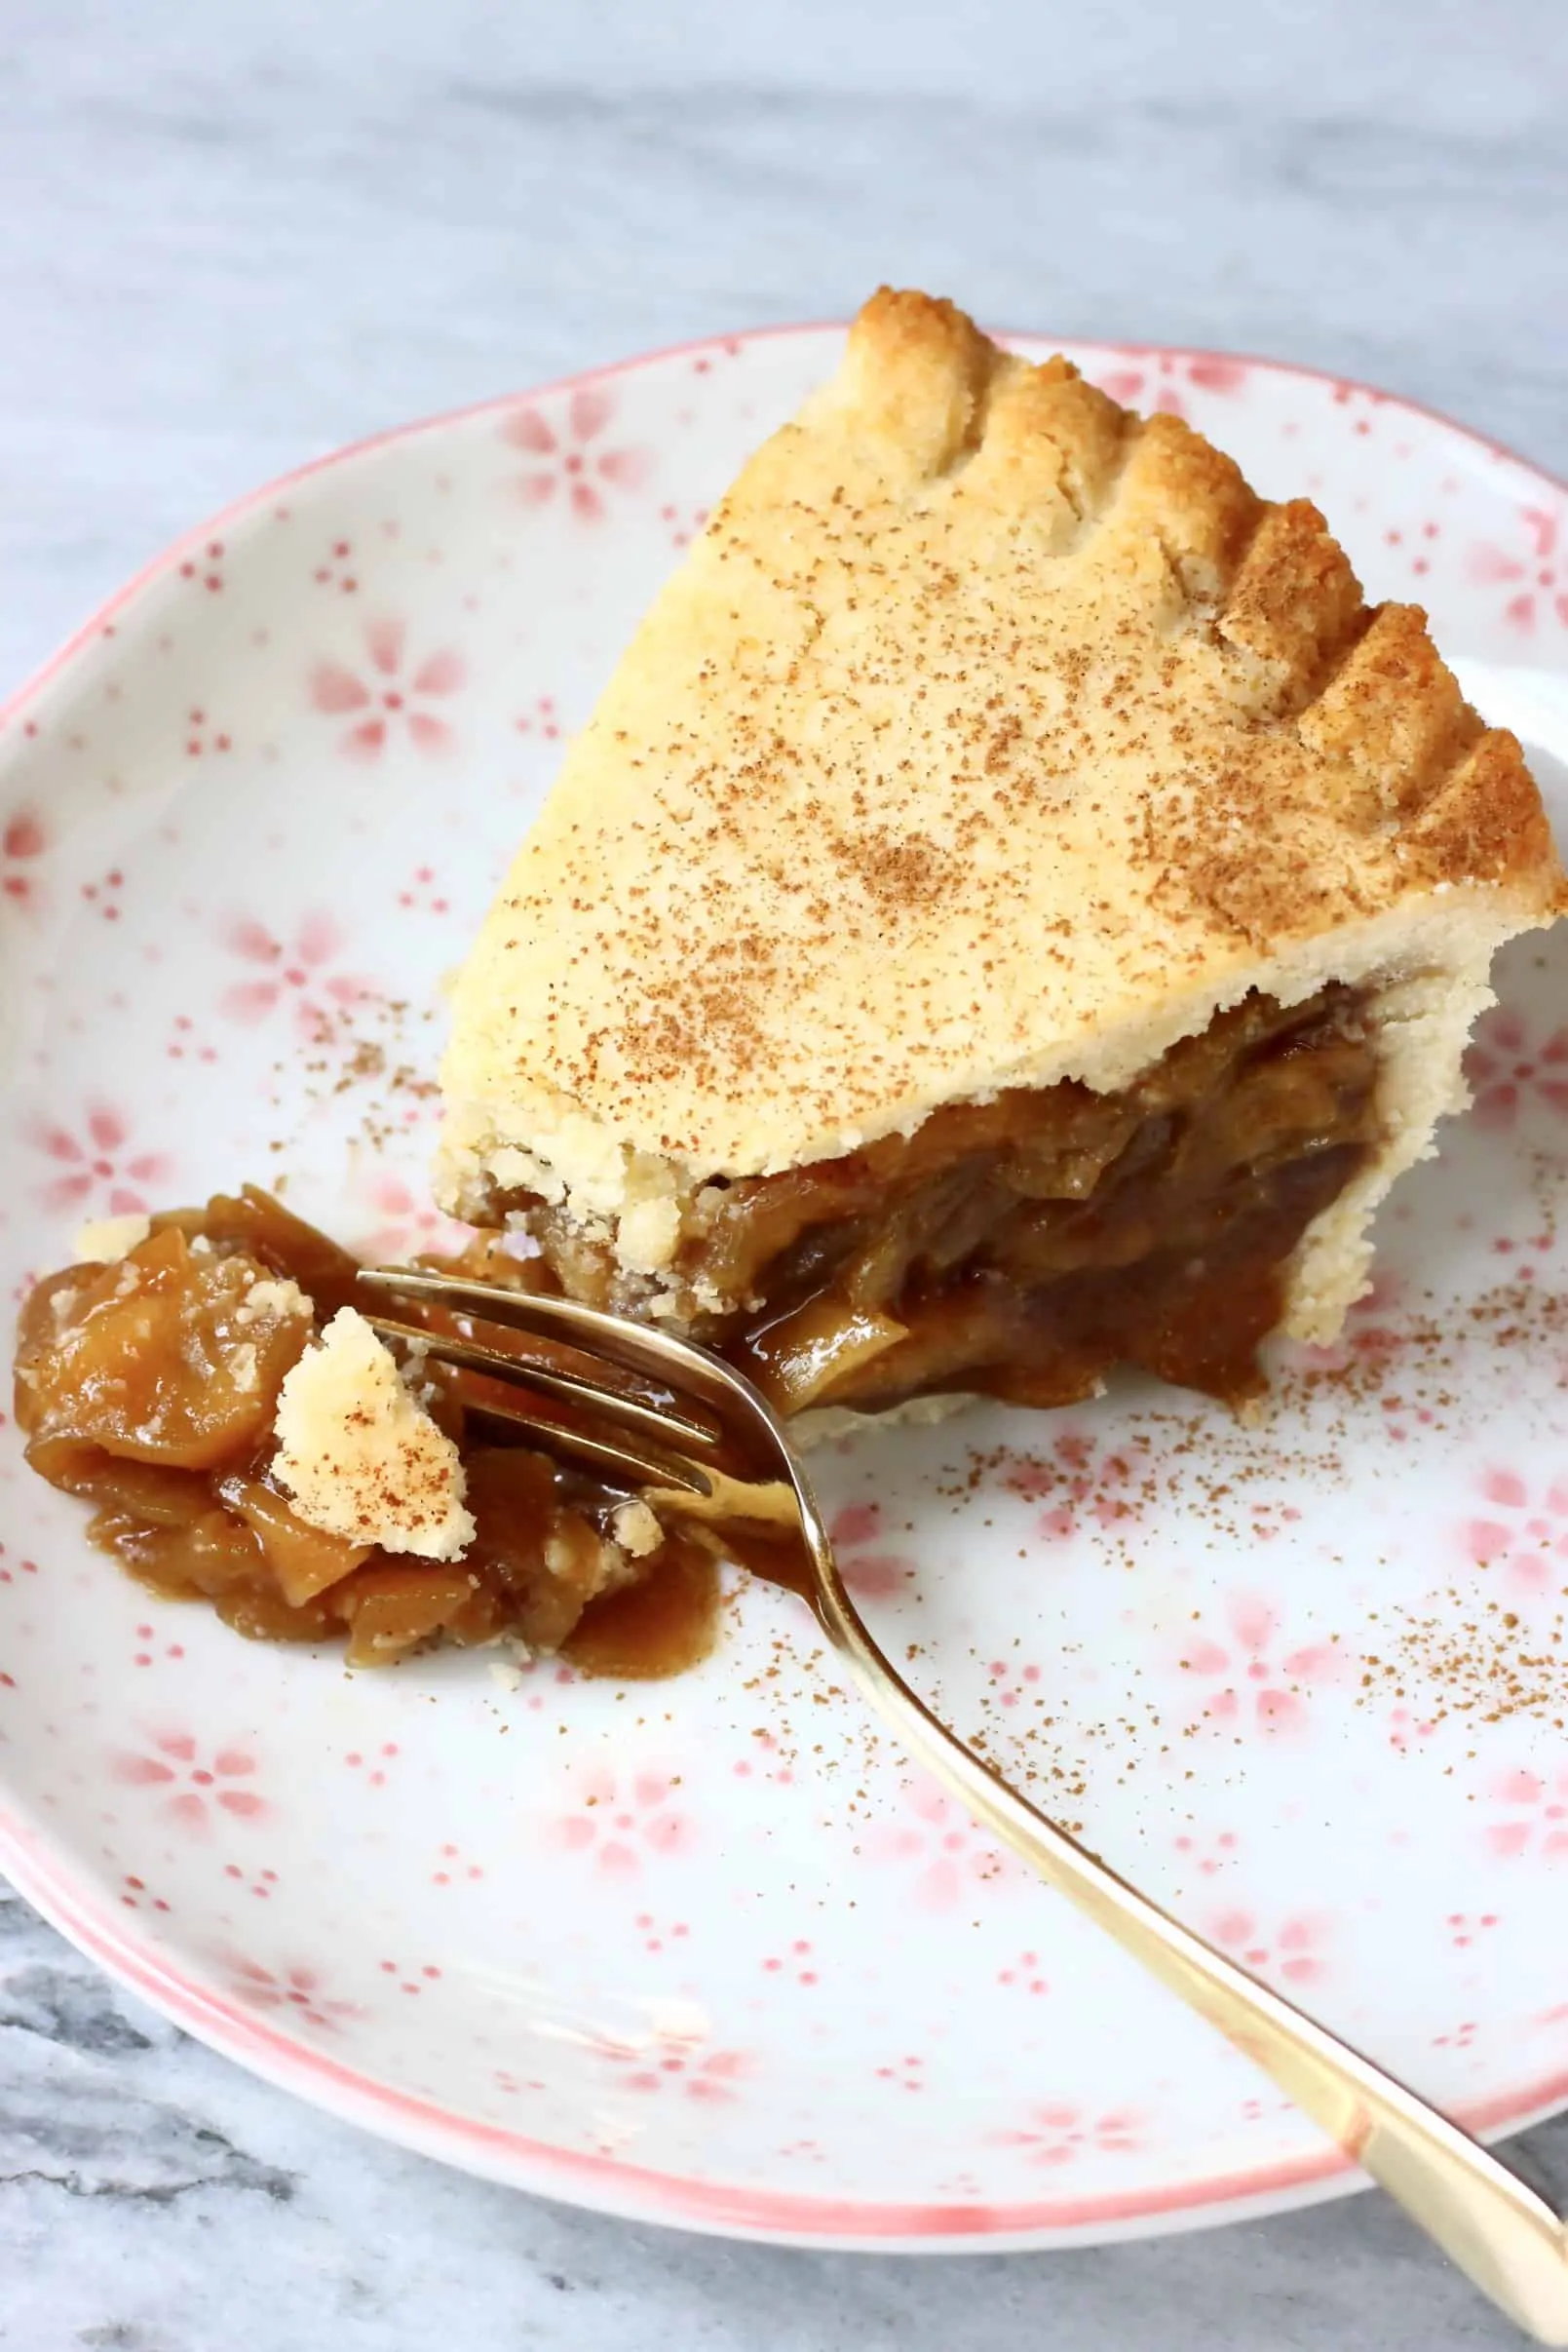 A slice of gluten-free vegan apple pie on a plate with a fork breaking off a piece